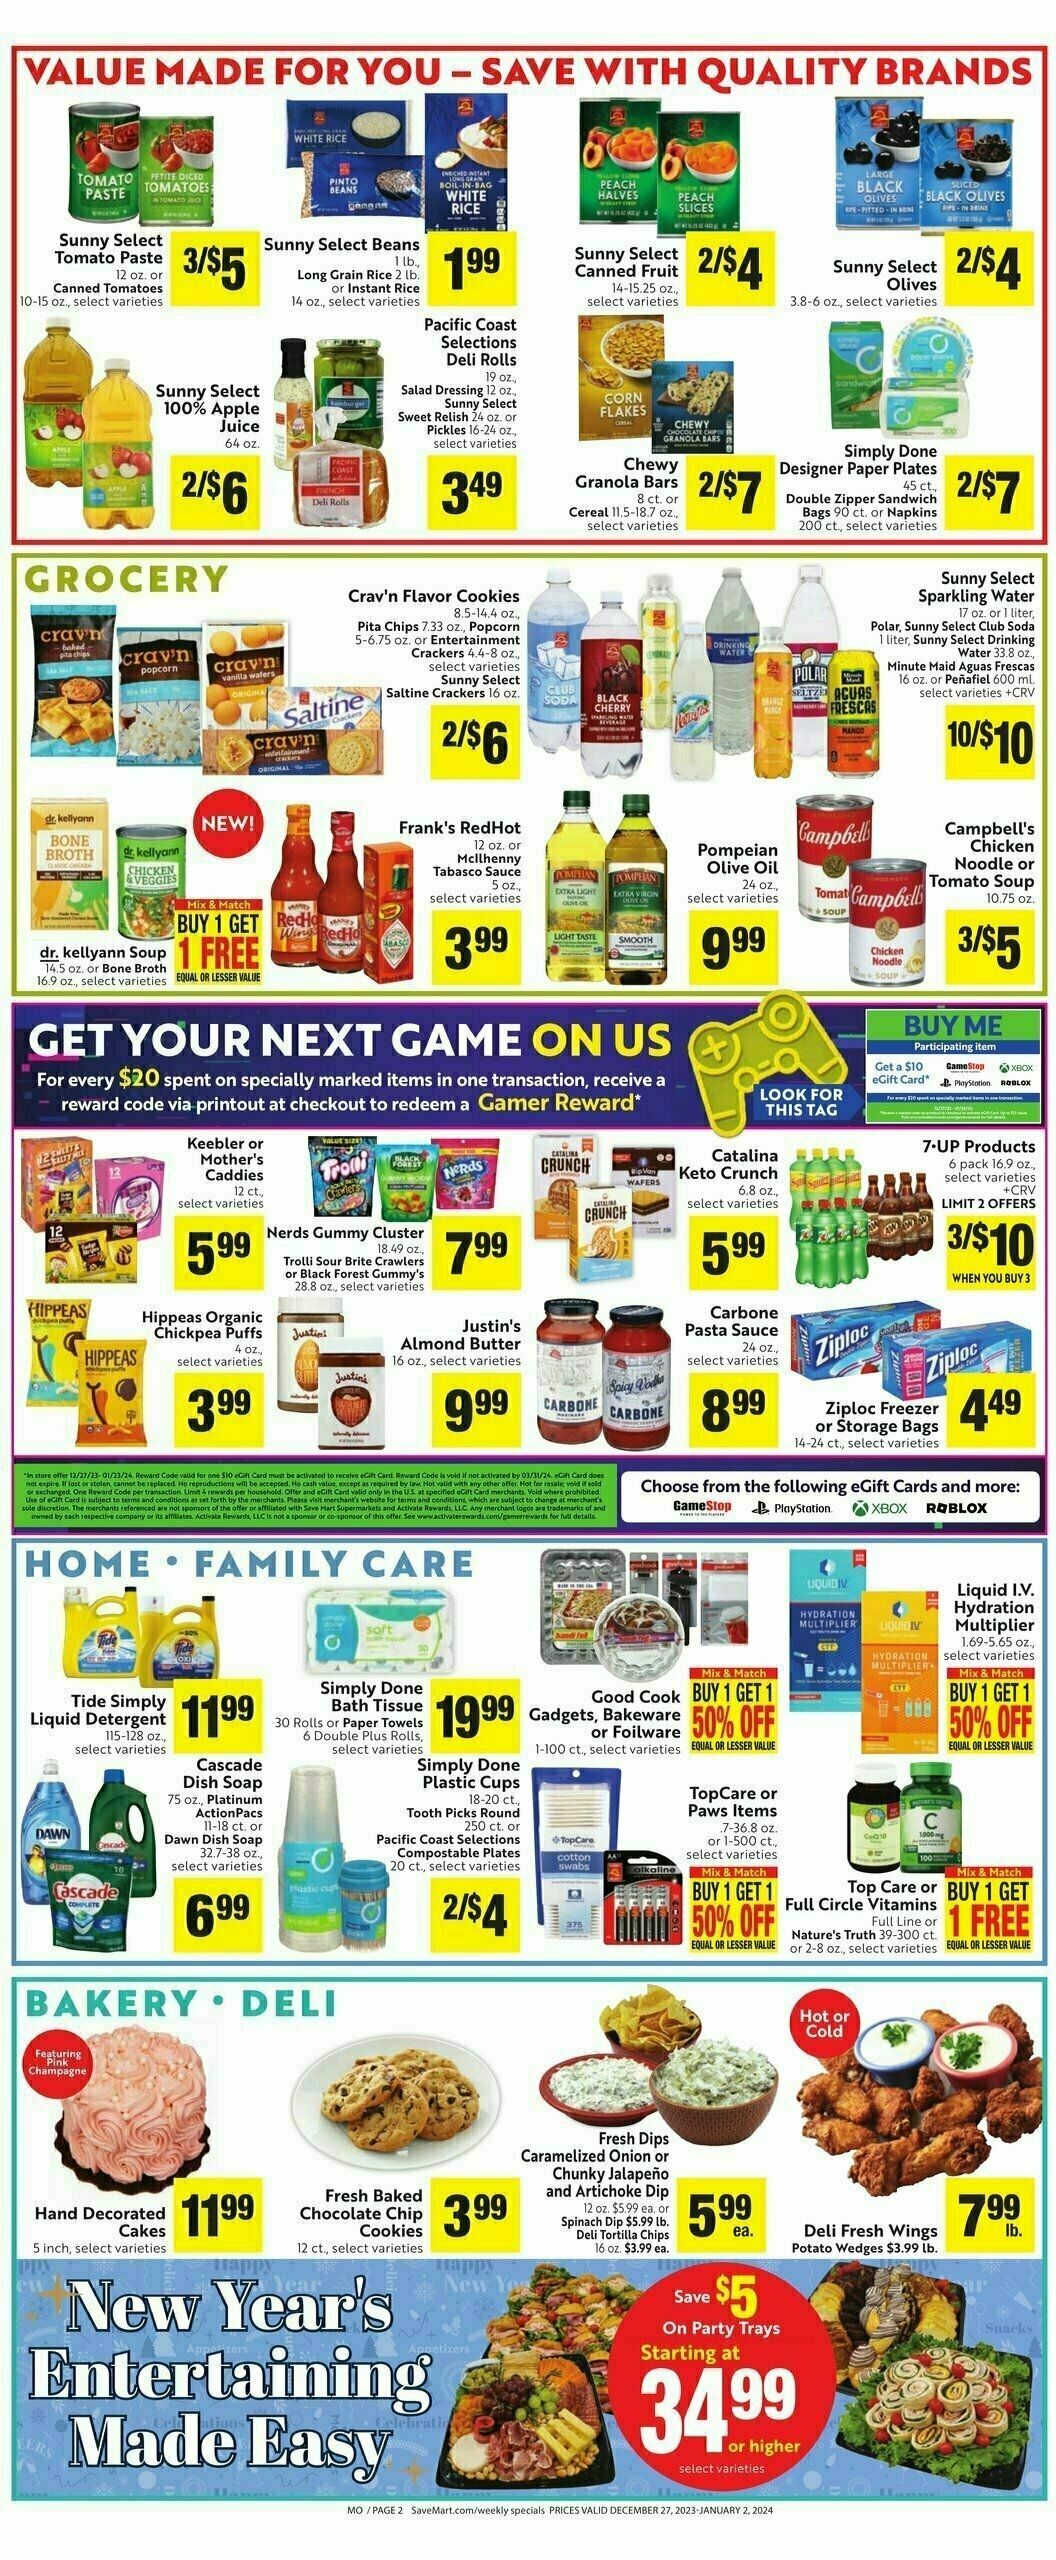 Save Mart Weekly Ad from December 27